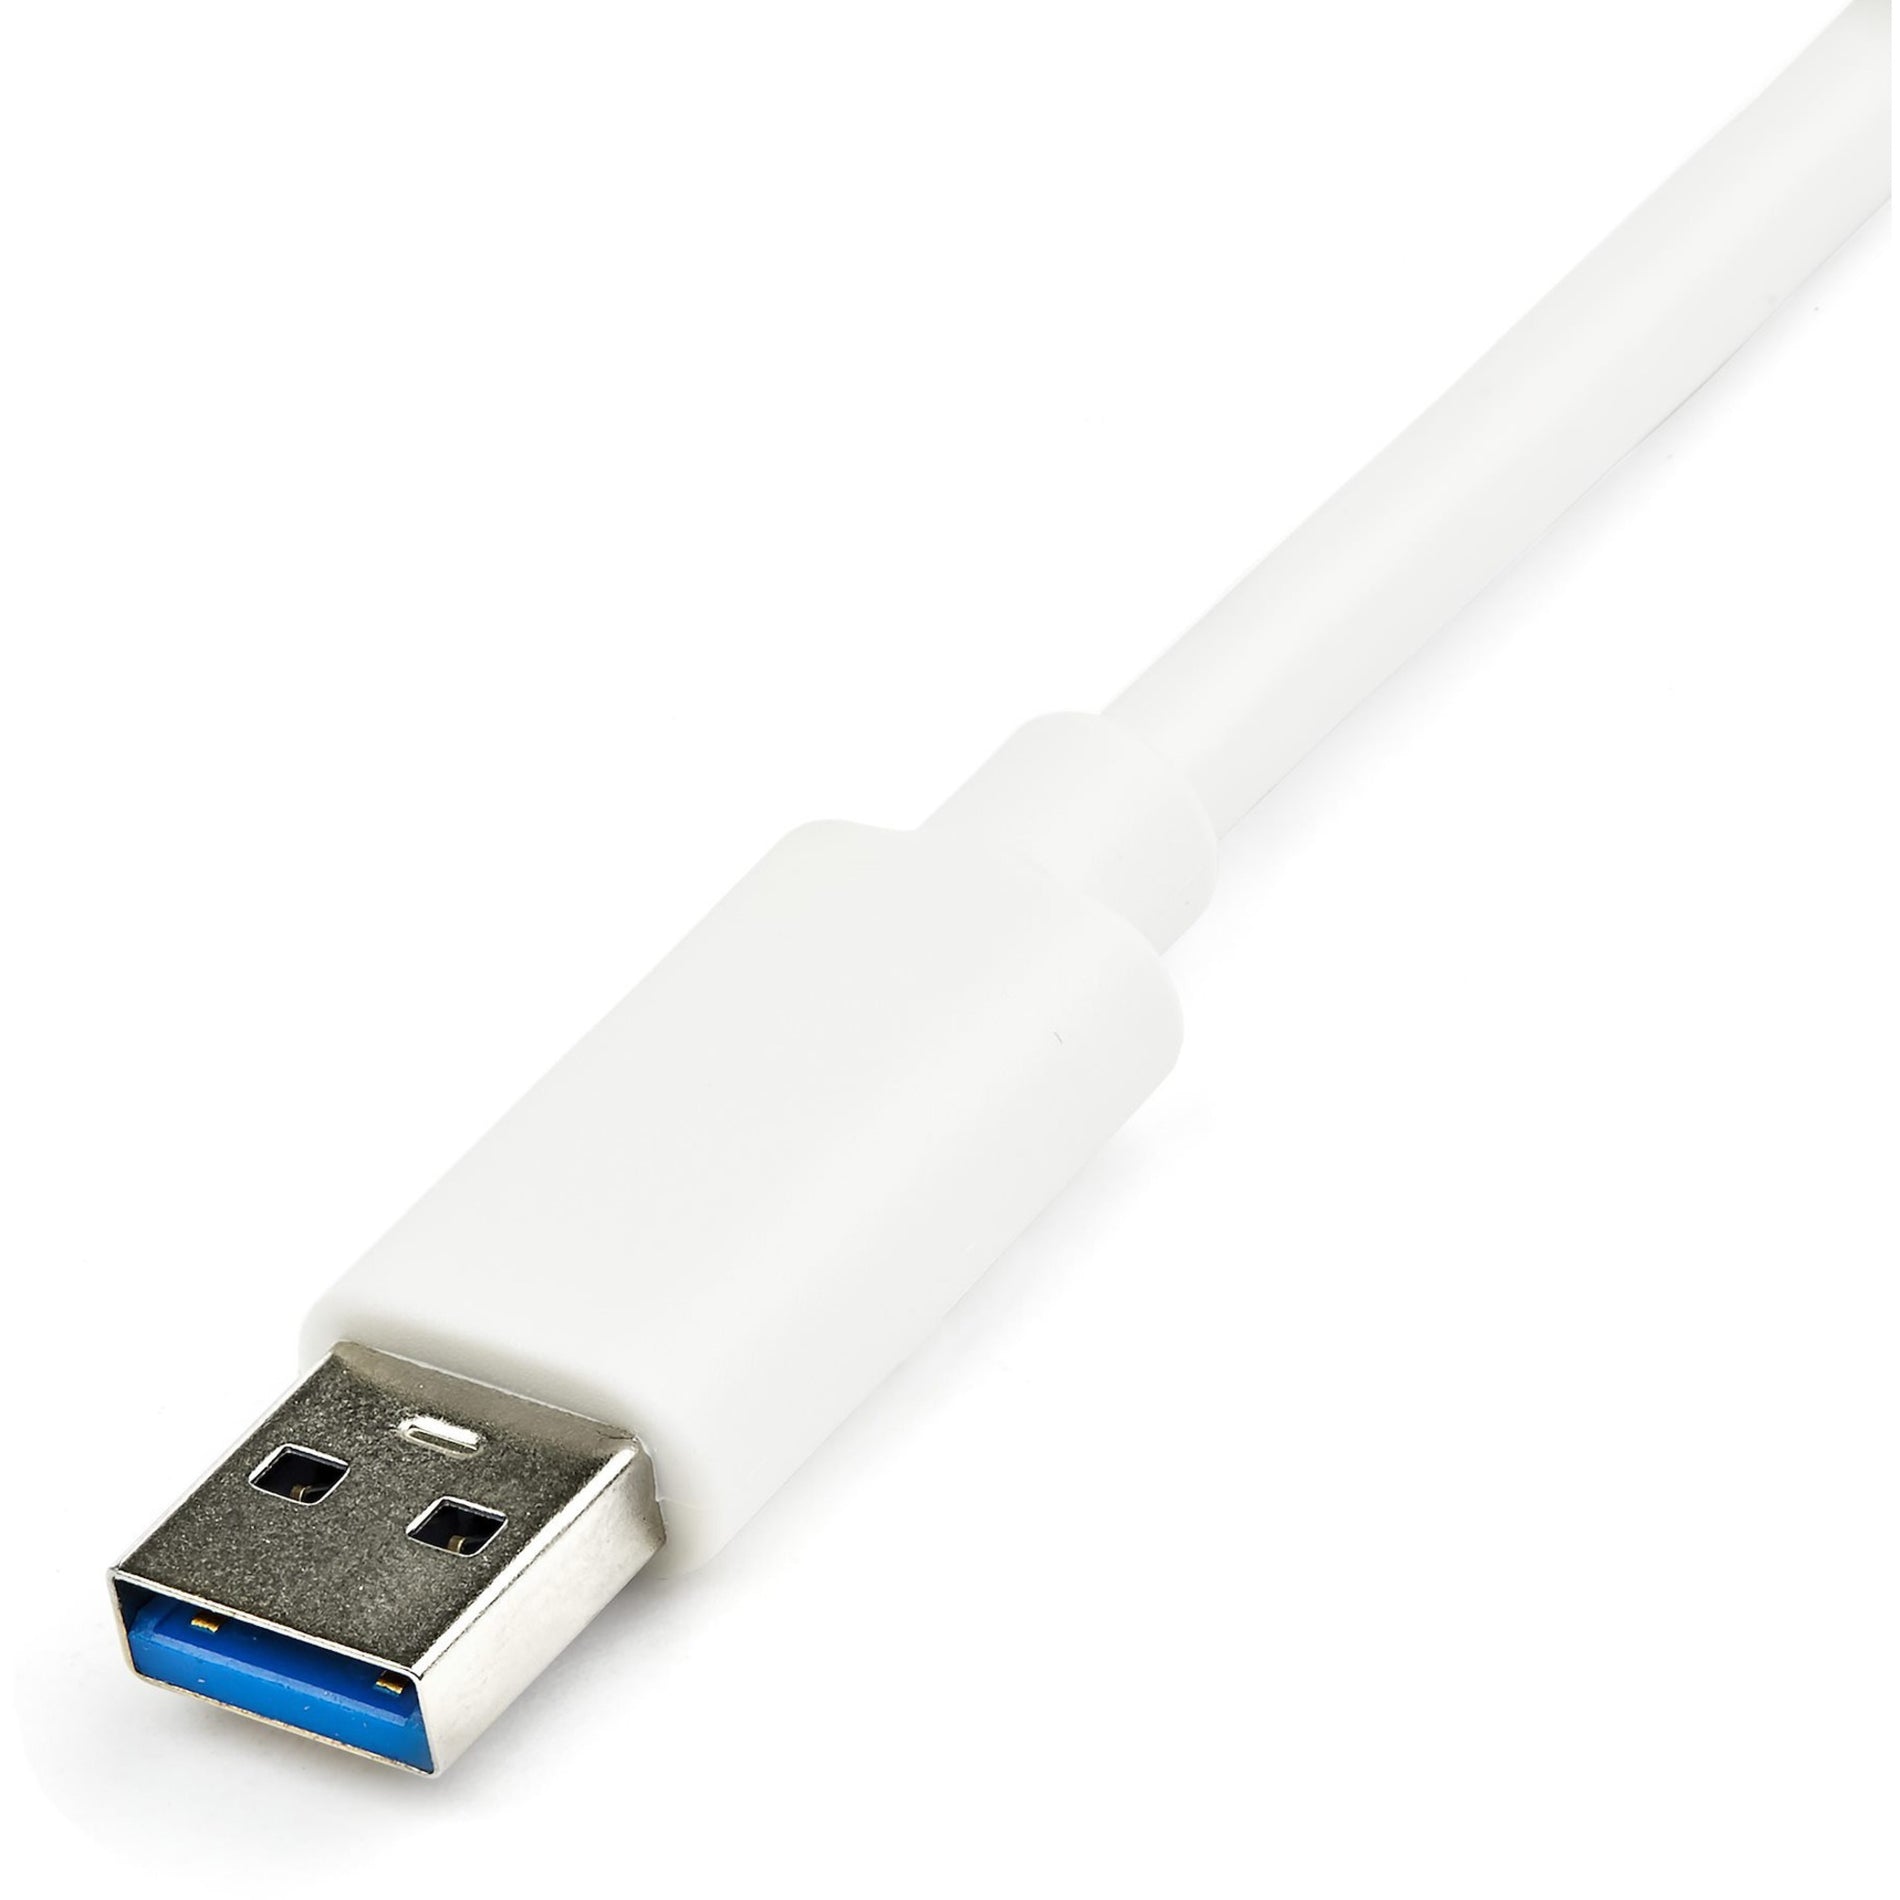 StarTech.com USB31000SPTW USB 3.0 to Gigabit Ethernet Adapter NIC w/ USB Port - White, High-Speed Internet Connection for Notebooks